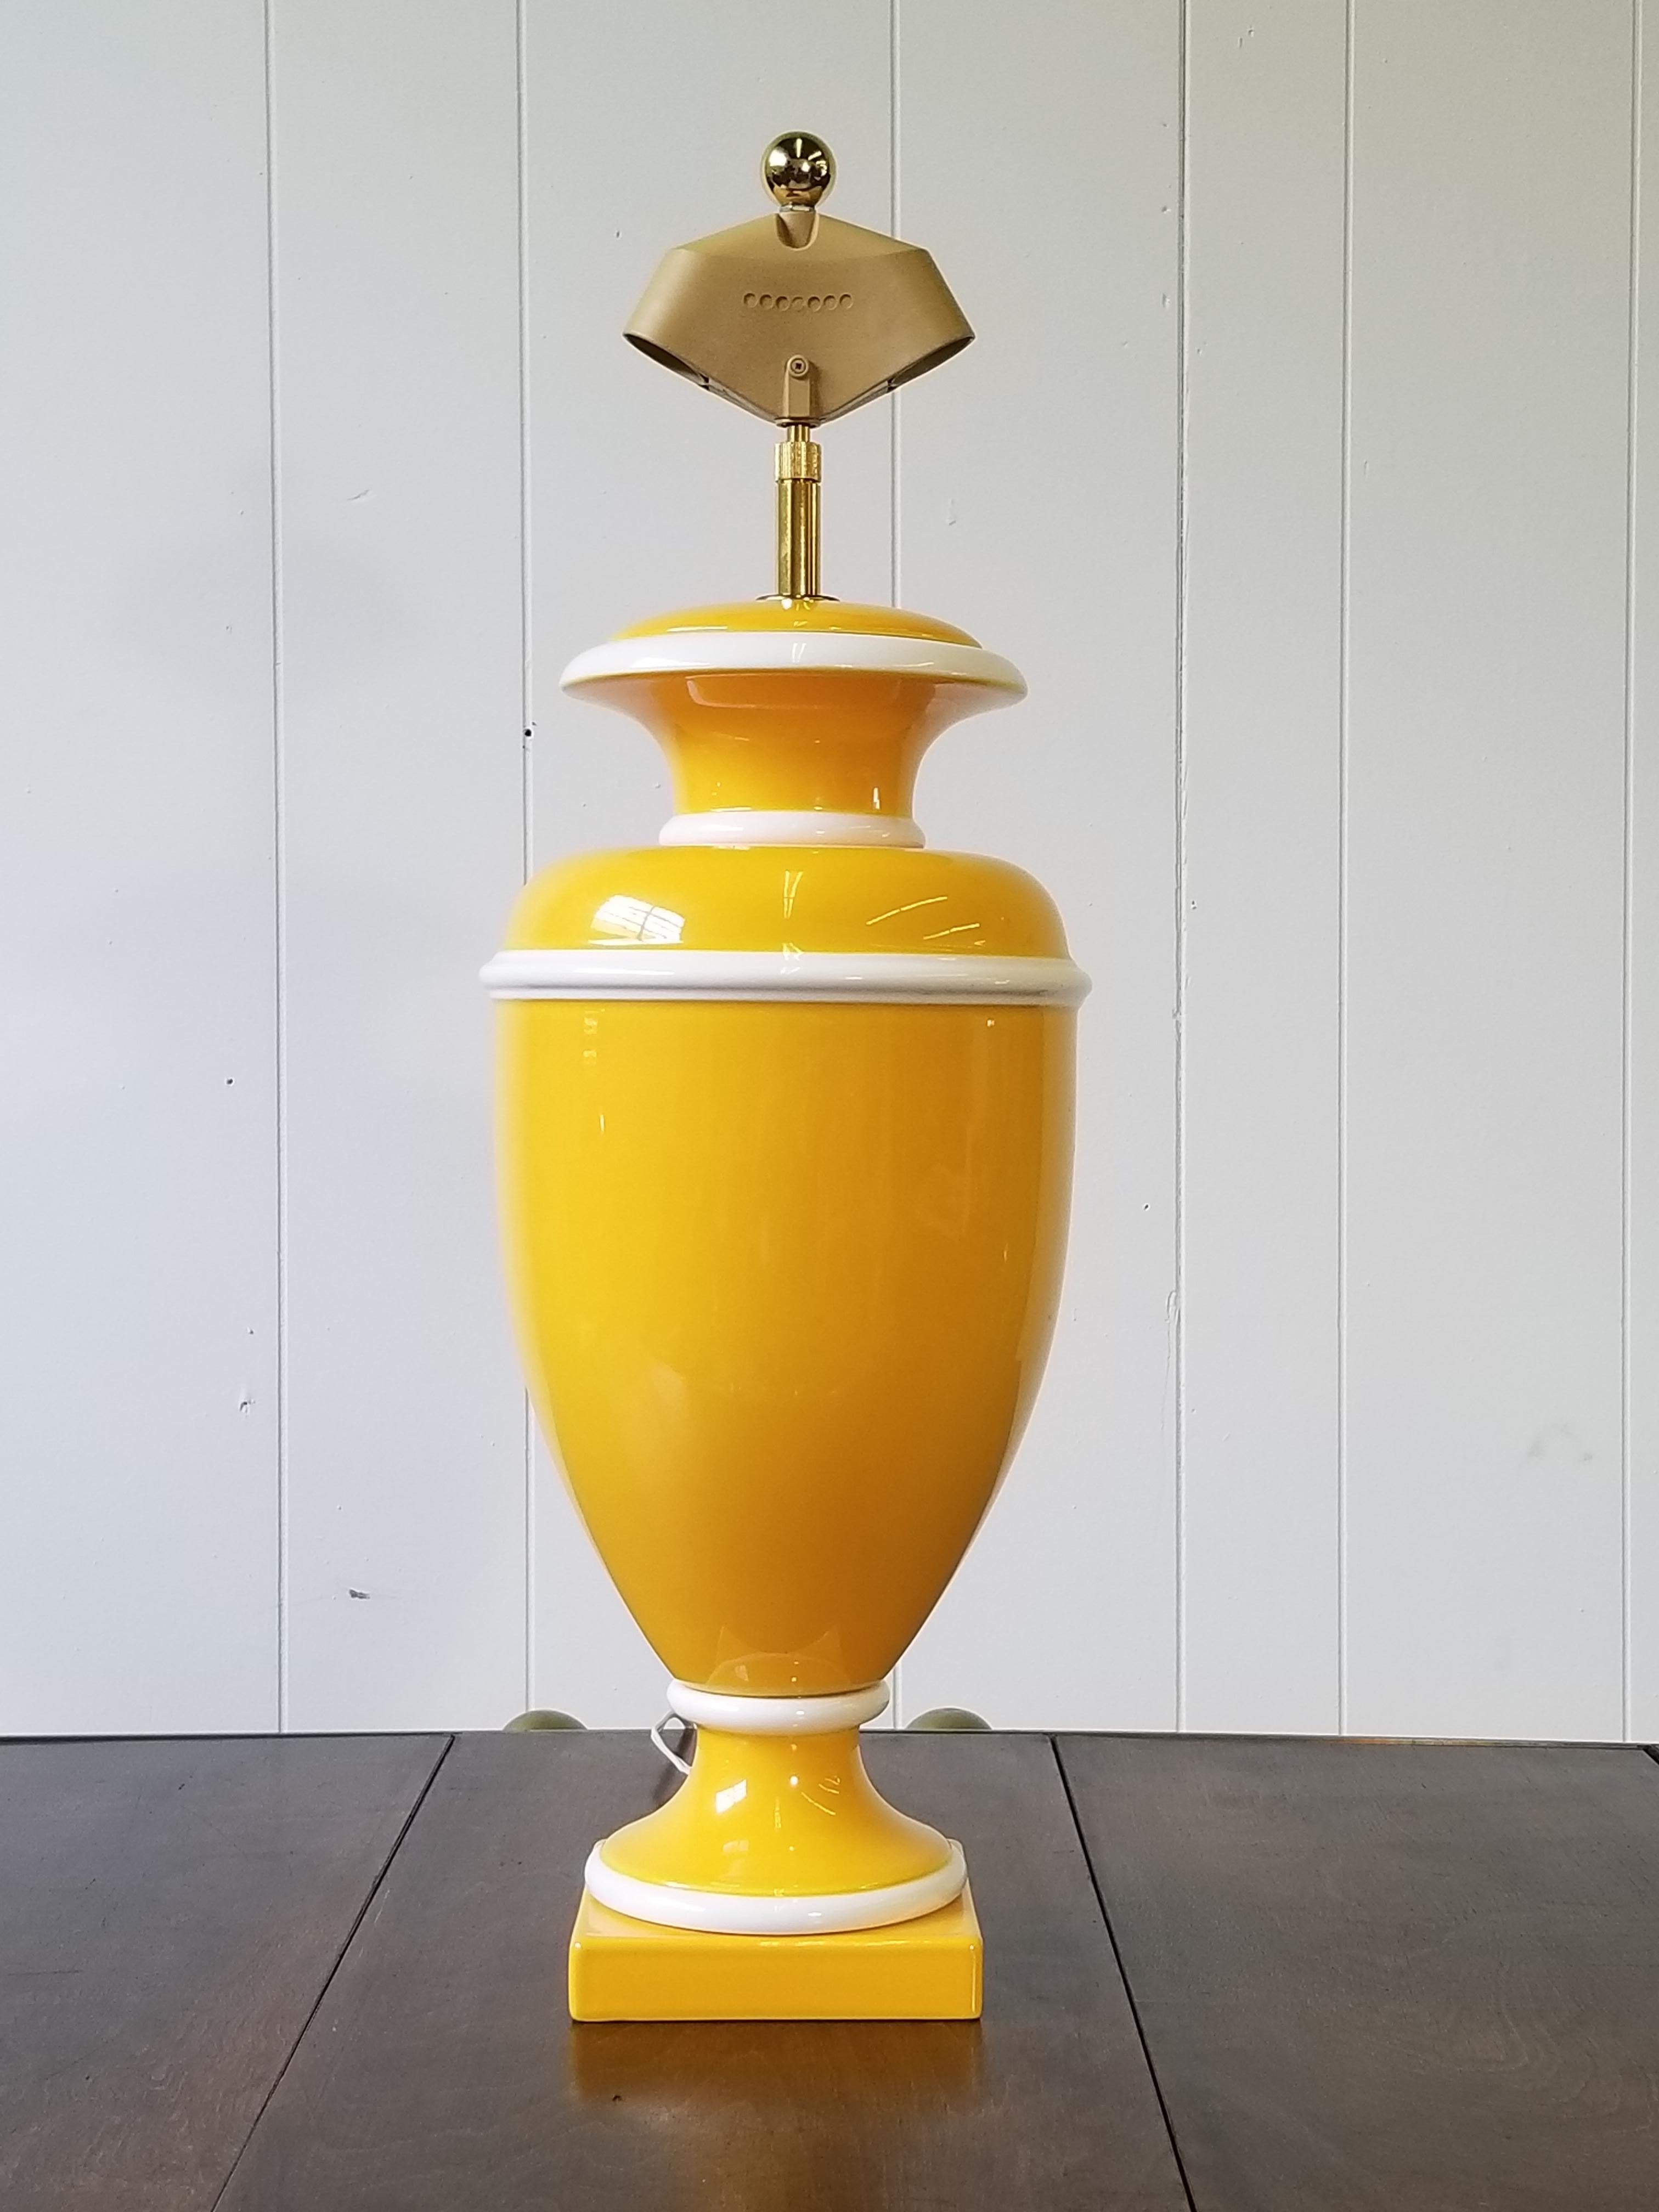 Dramatic Hollywood Regency Italian ceramic urn lamp in bright yellow and trimmed in white. There is a built in and adjustable harp plated in gold; it fully extends to 38